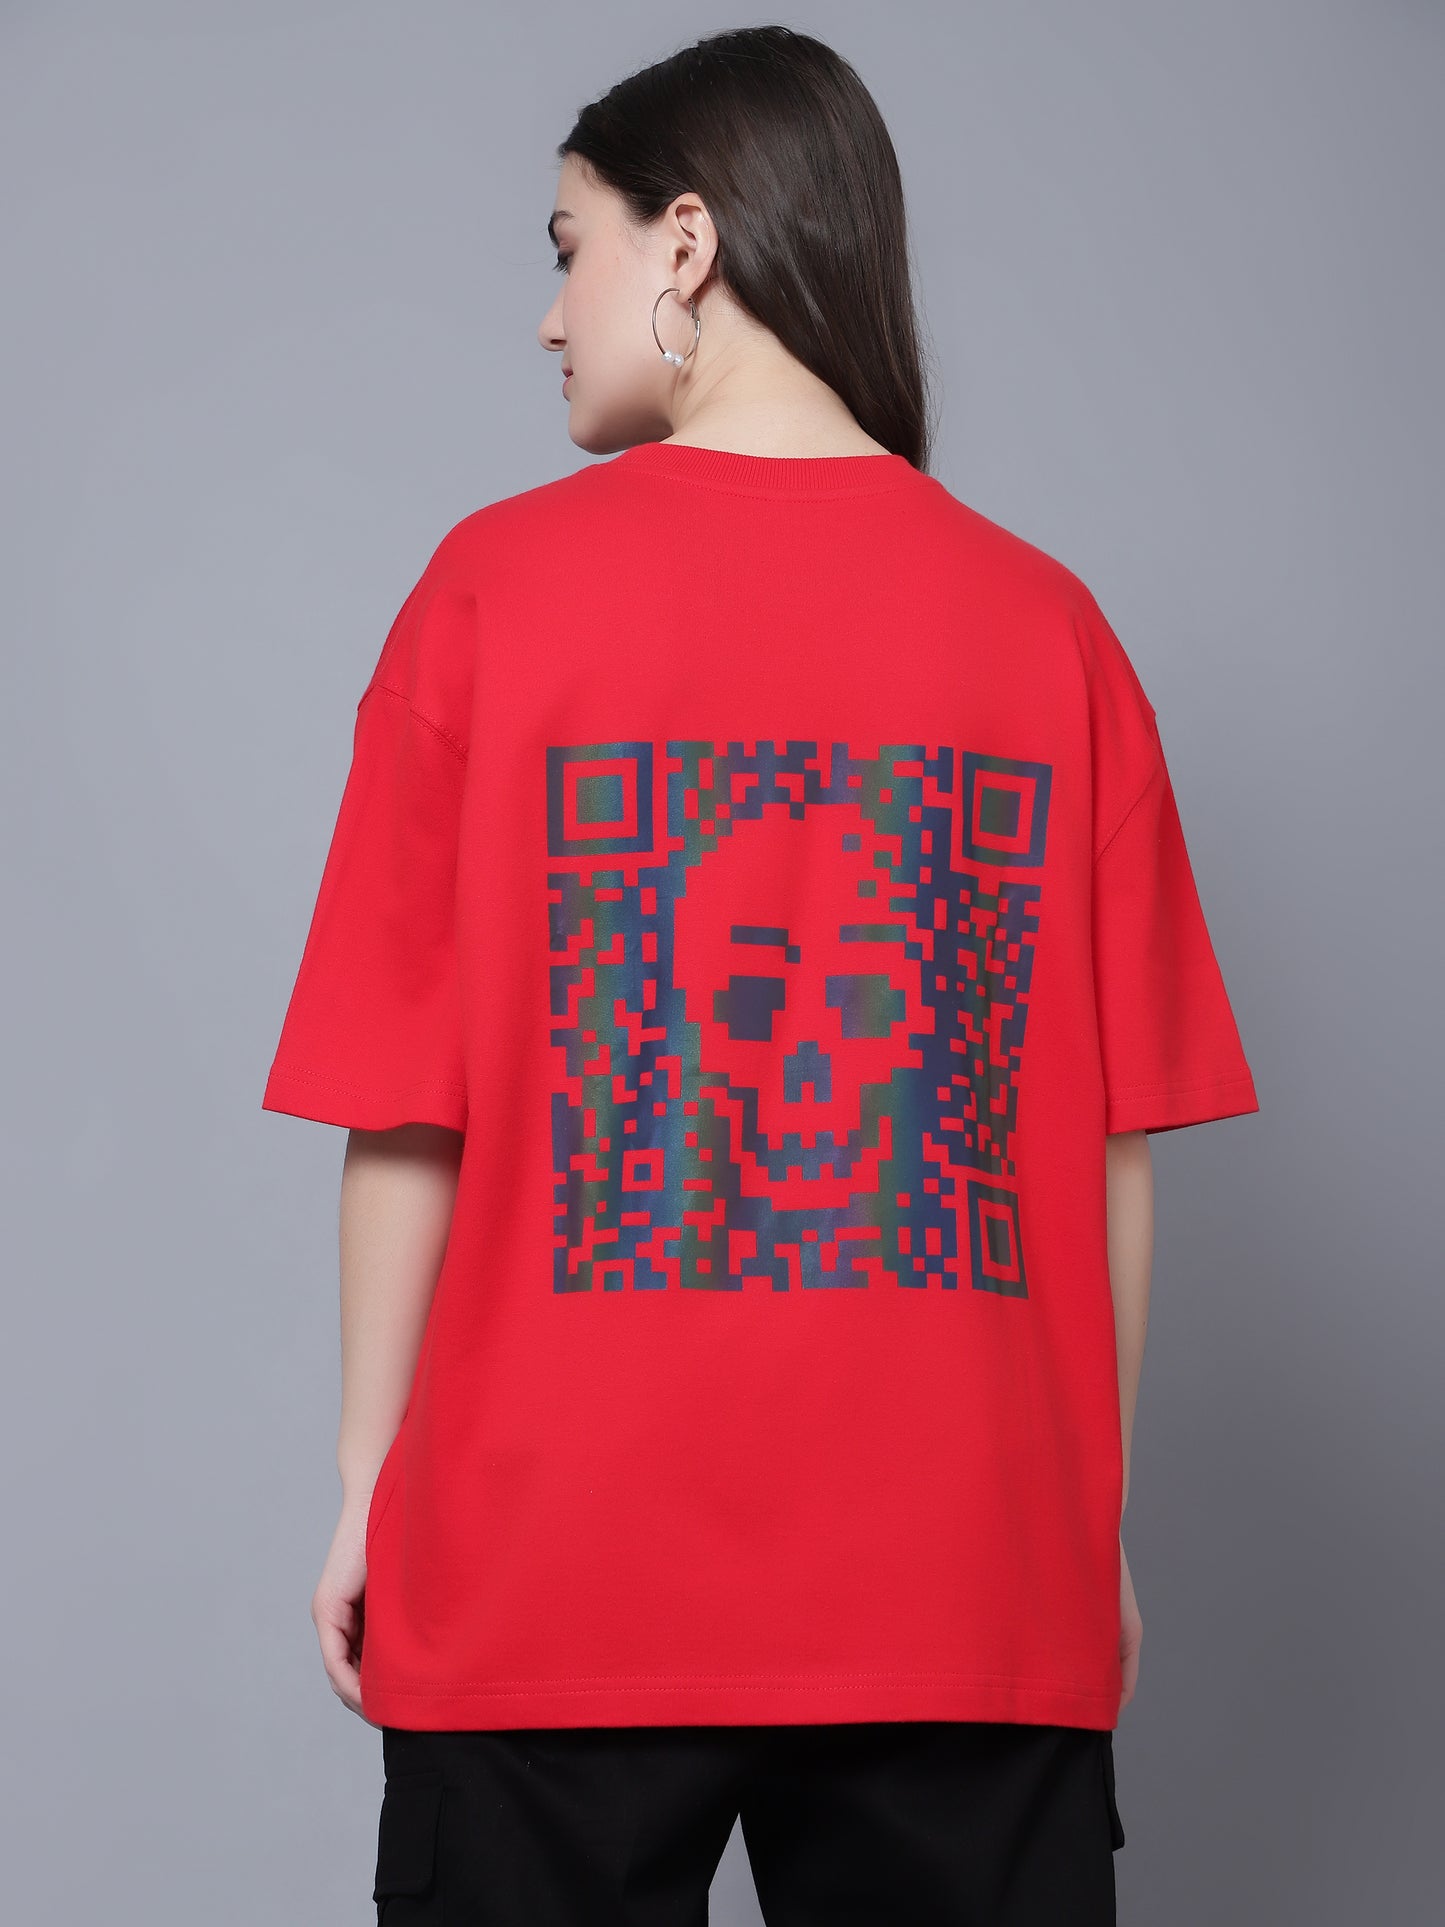 Skull Scanner Rainbow Reflector Over-Sized T-Shirt (Red) - Wearduds